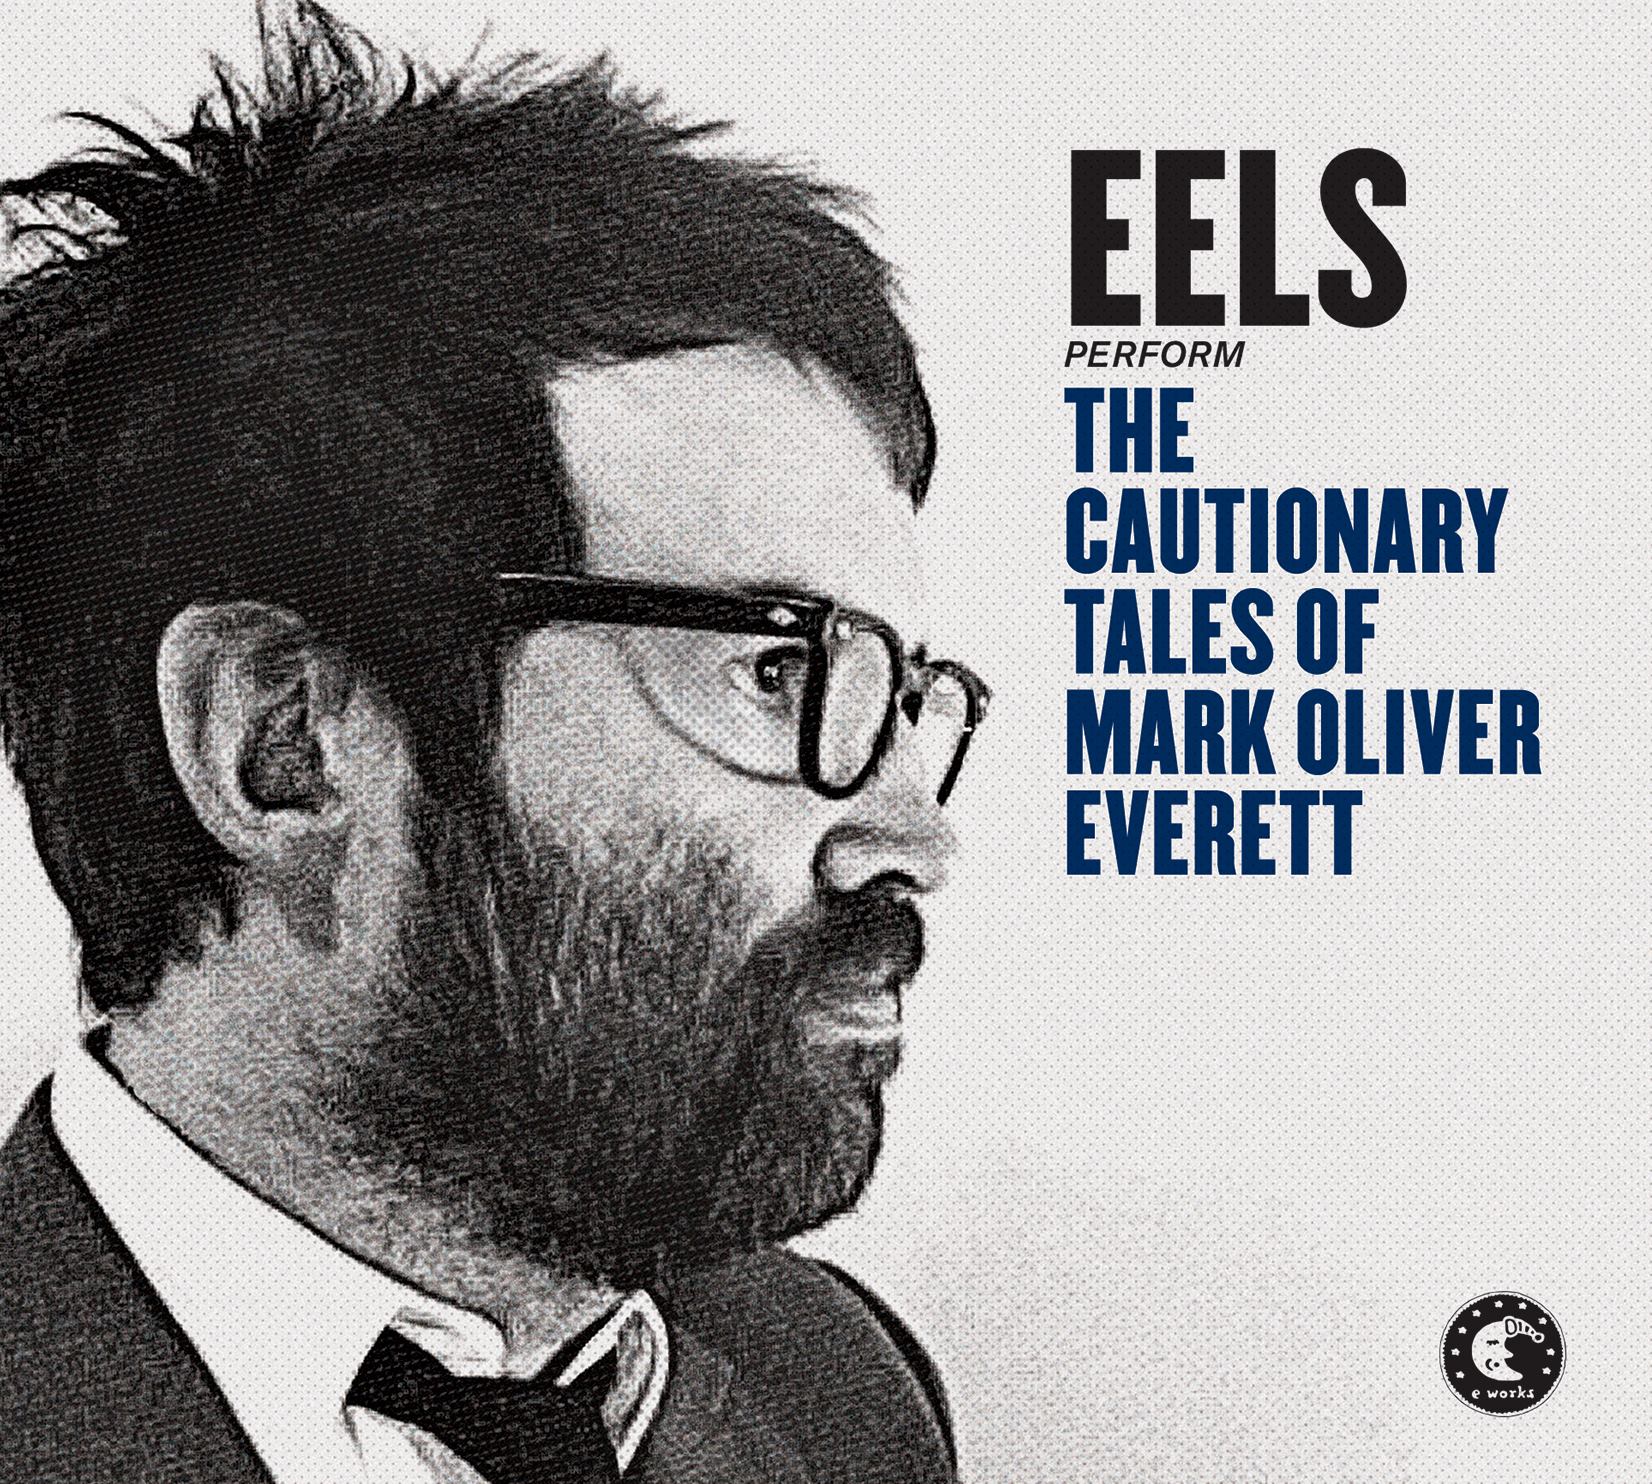 2014 - The cautionary tales of Mark Oliver Everett - CD 1